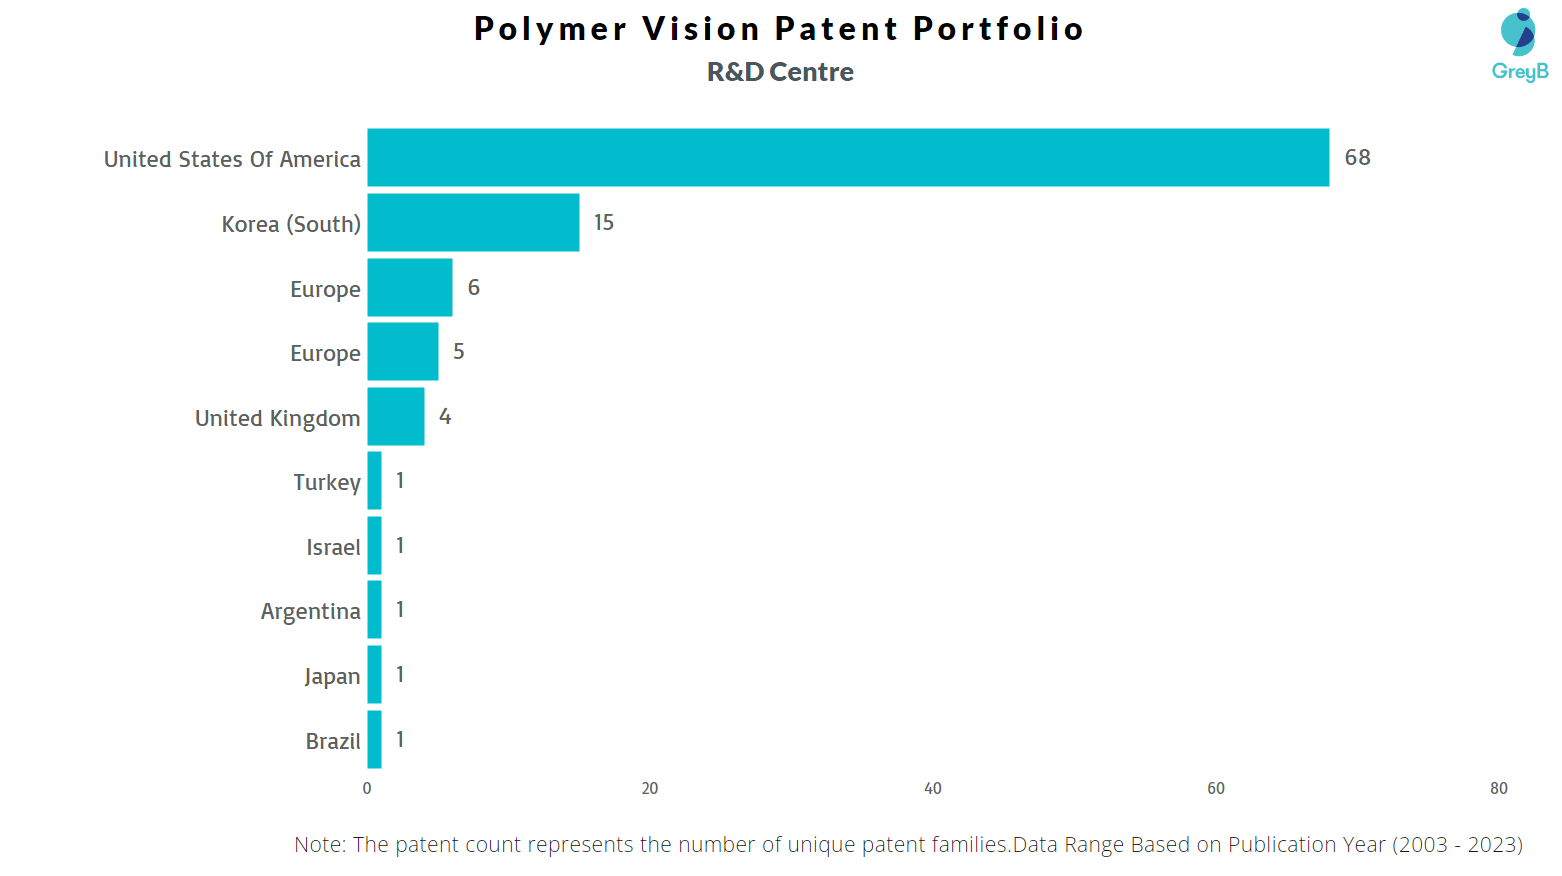 R&D Centres of Polymer Vision